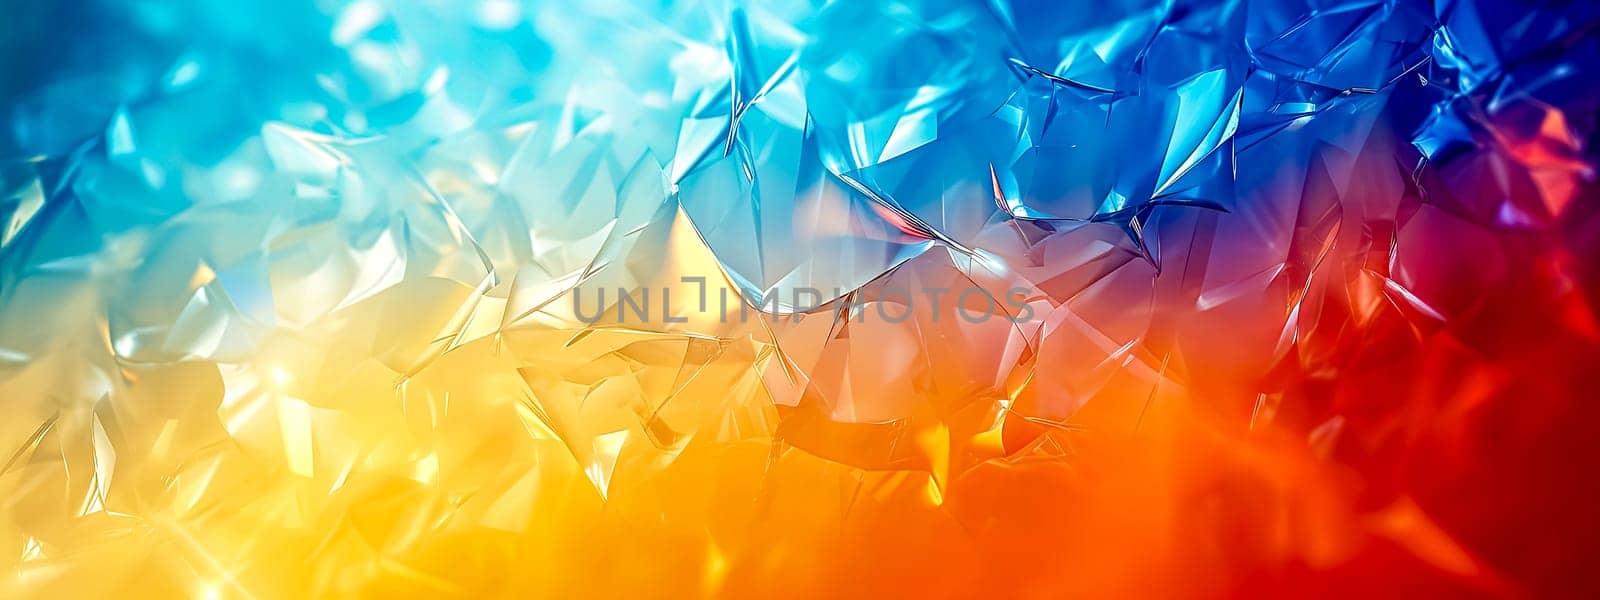 Abstract and dynamic composition with a flow of crystalline shapes transitioning from warm golden tones to cool blues and vibrant reds, suggestive of a digital art concept